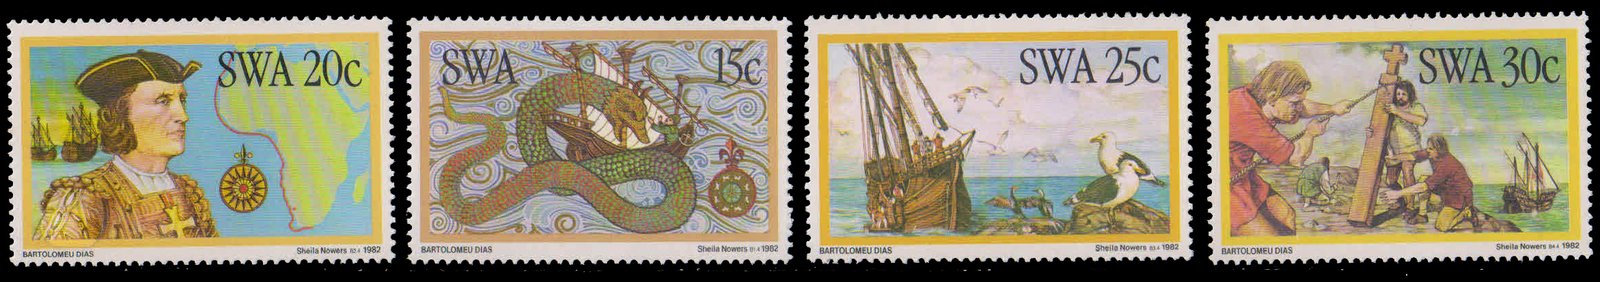 SOUTH WEST AFRICA 1982-Mythical Sea-Monster, Dias & Map, Bird, Ship, Christian, Set of 4 Stamps, MNH, S.G. 394-397